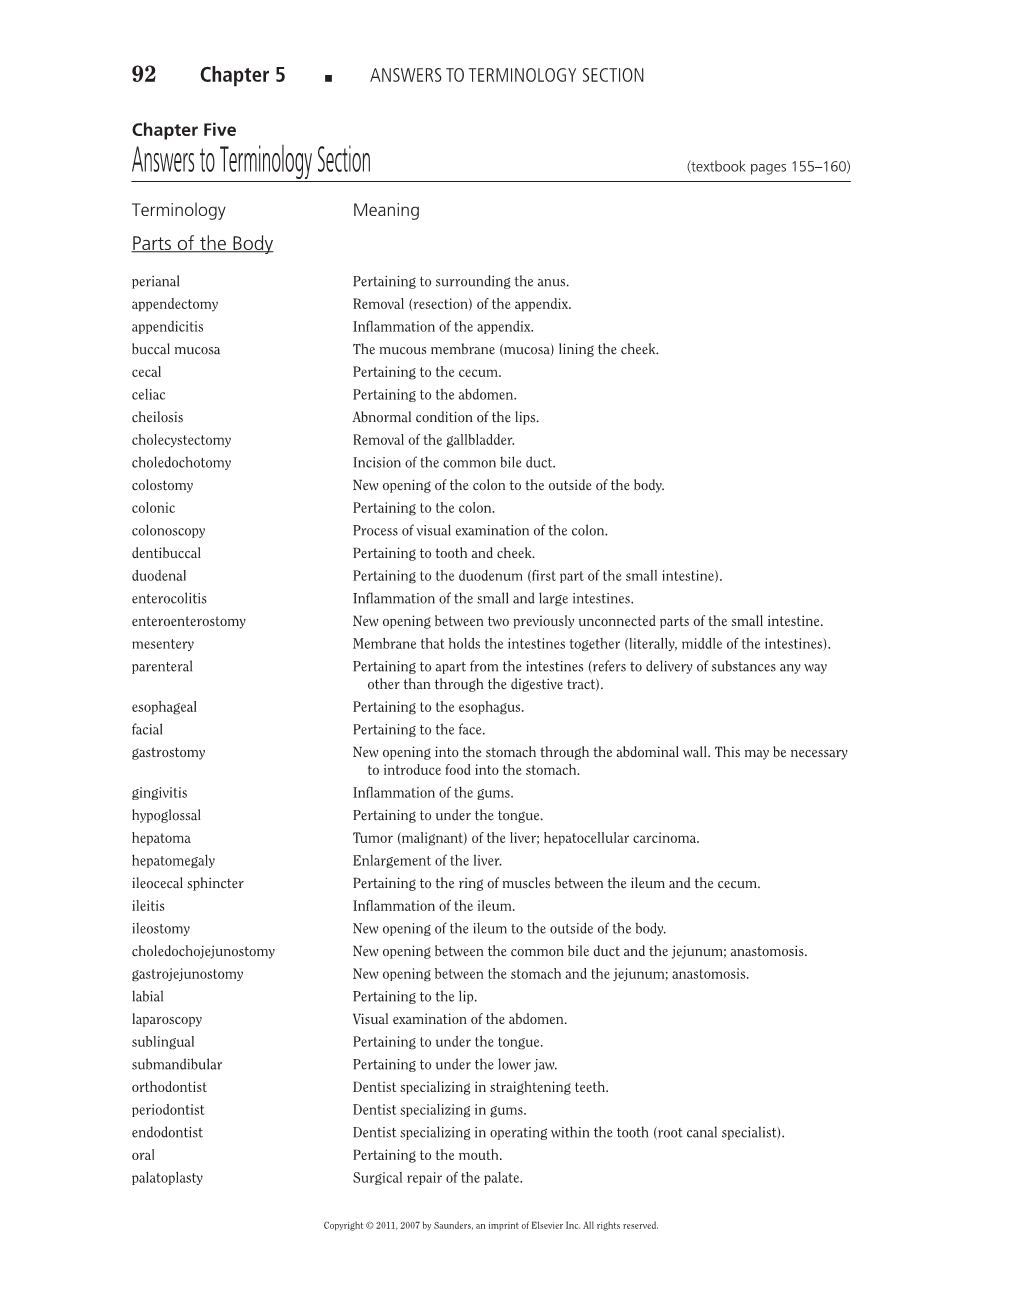 Answers to Terminology Section